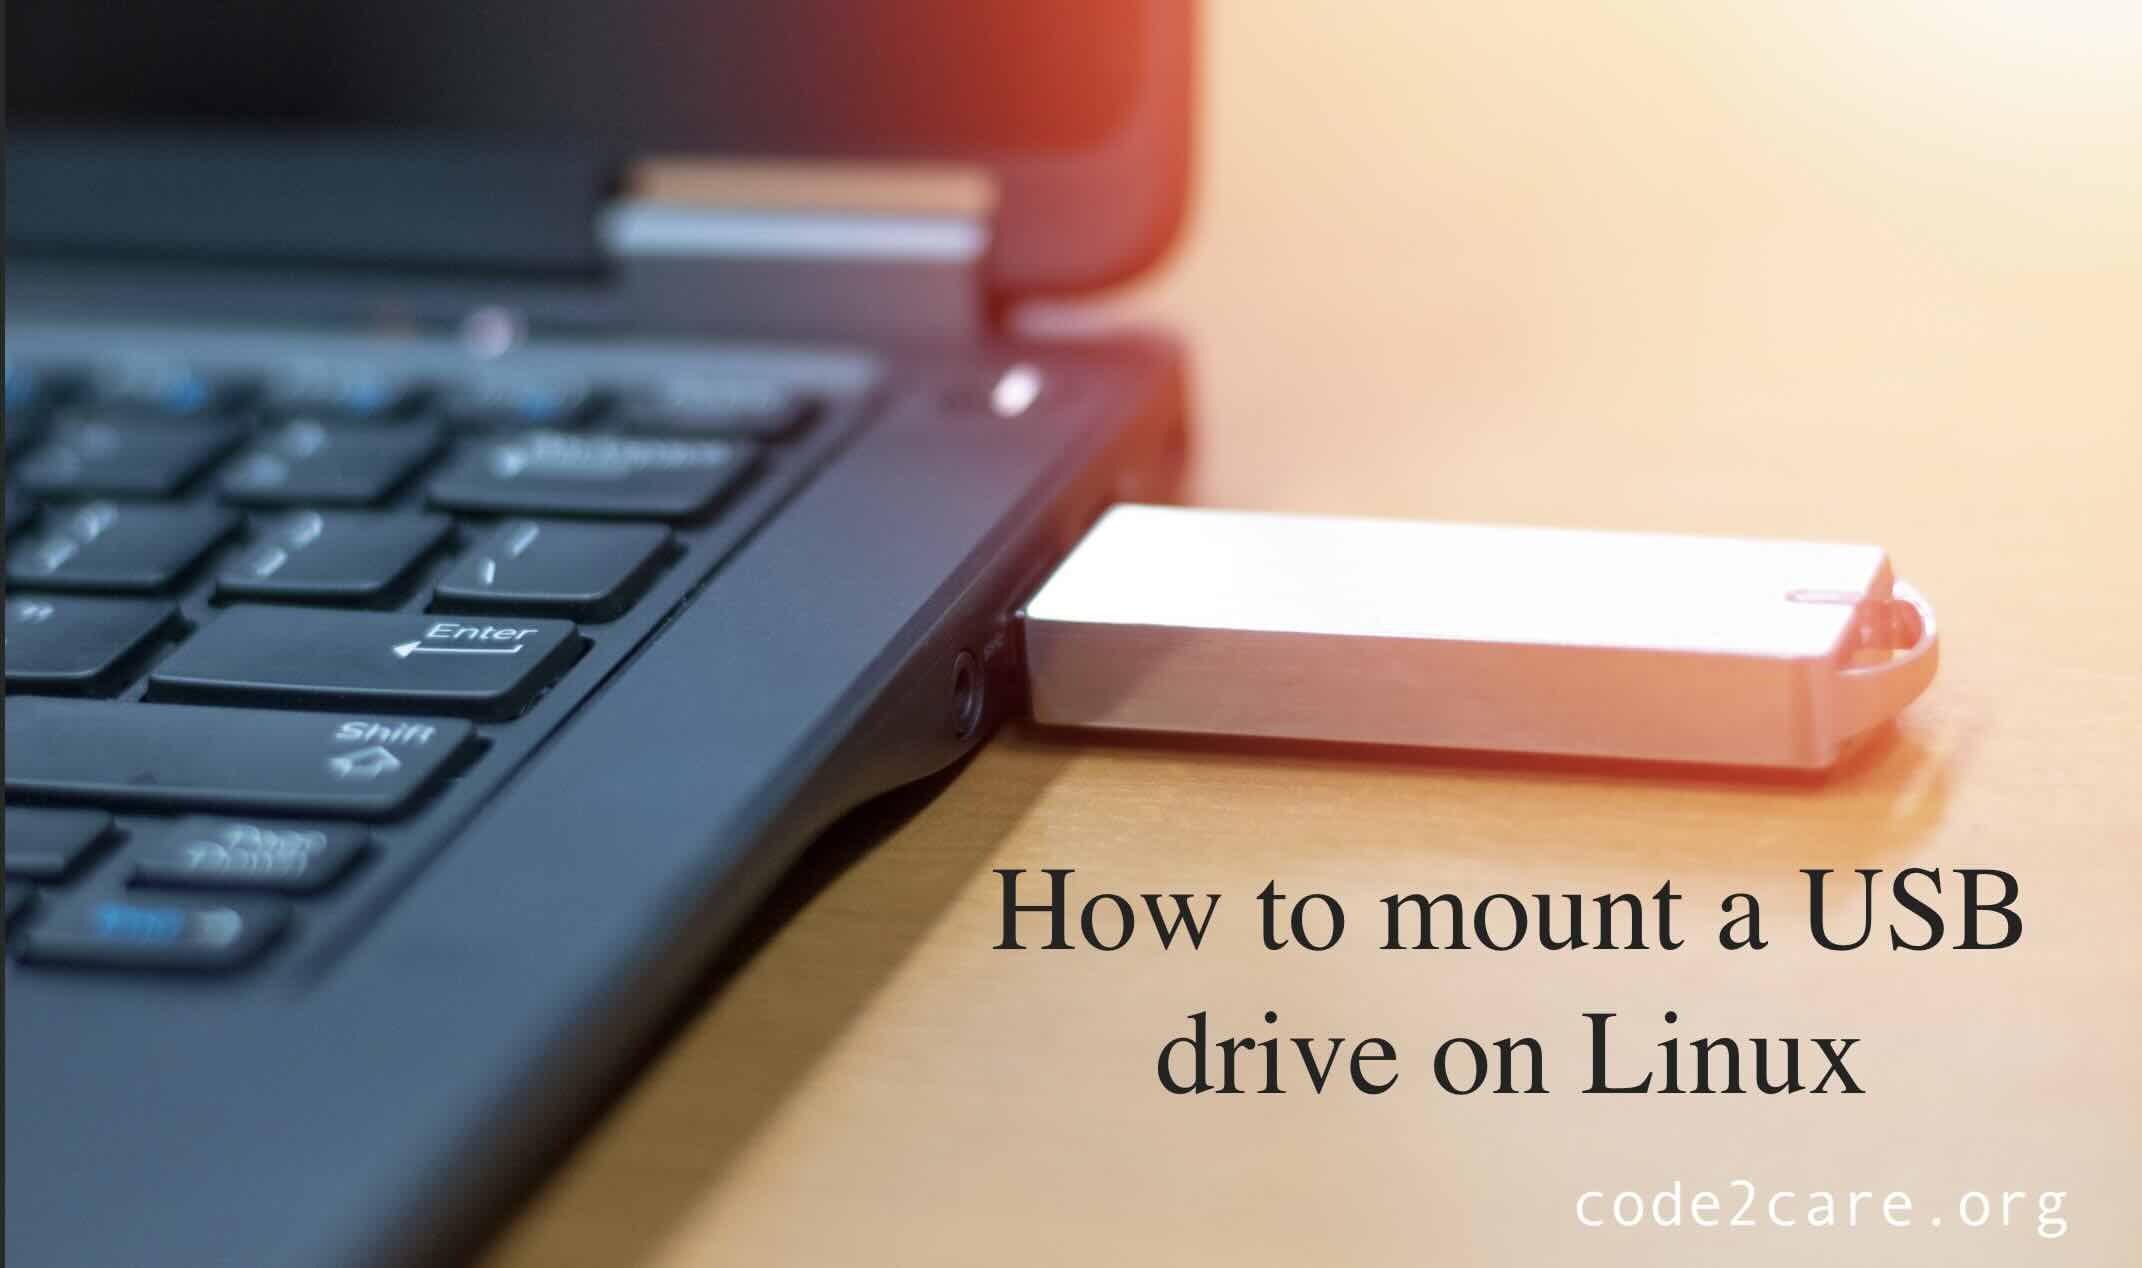 How to mount a USB drive on Linux